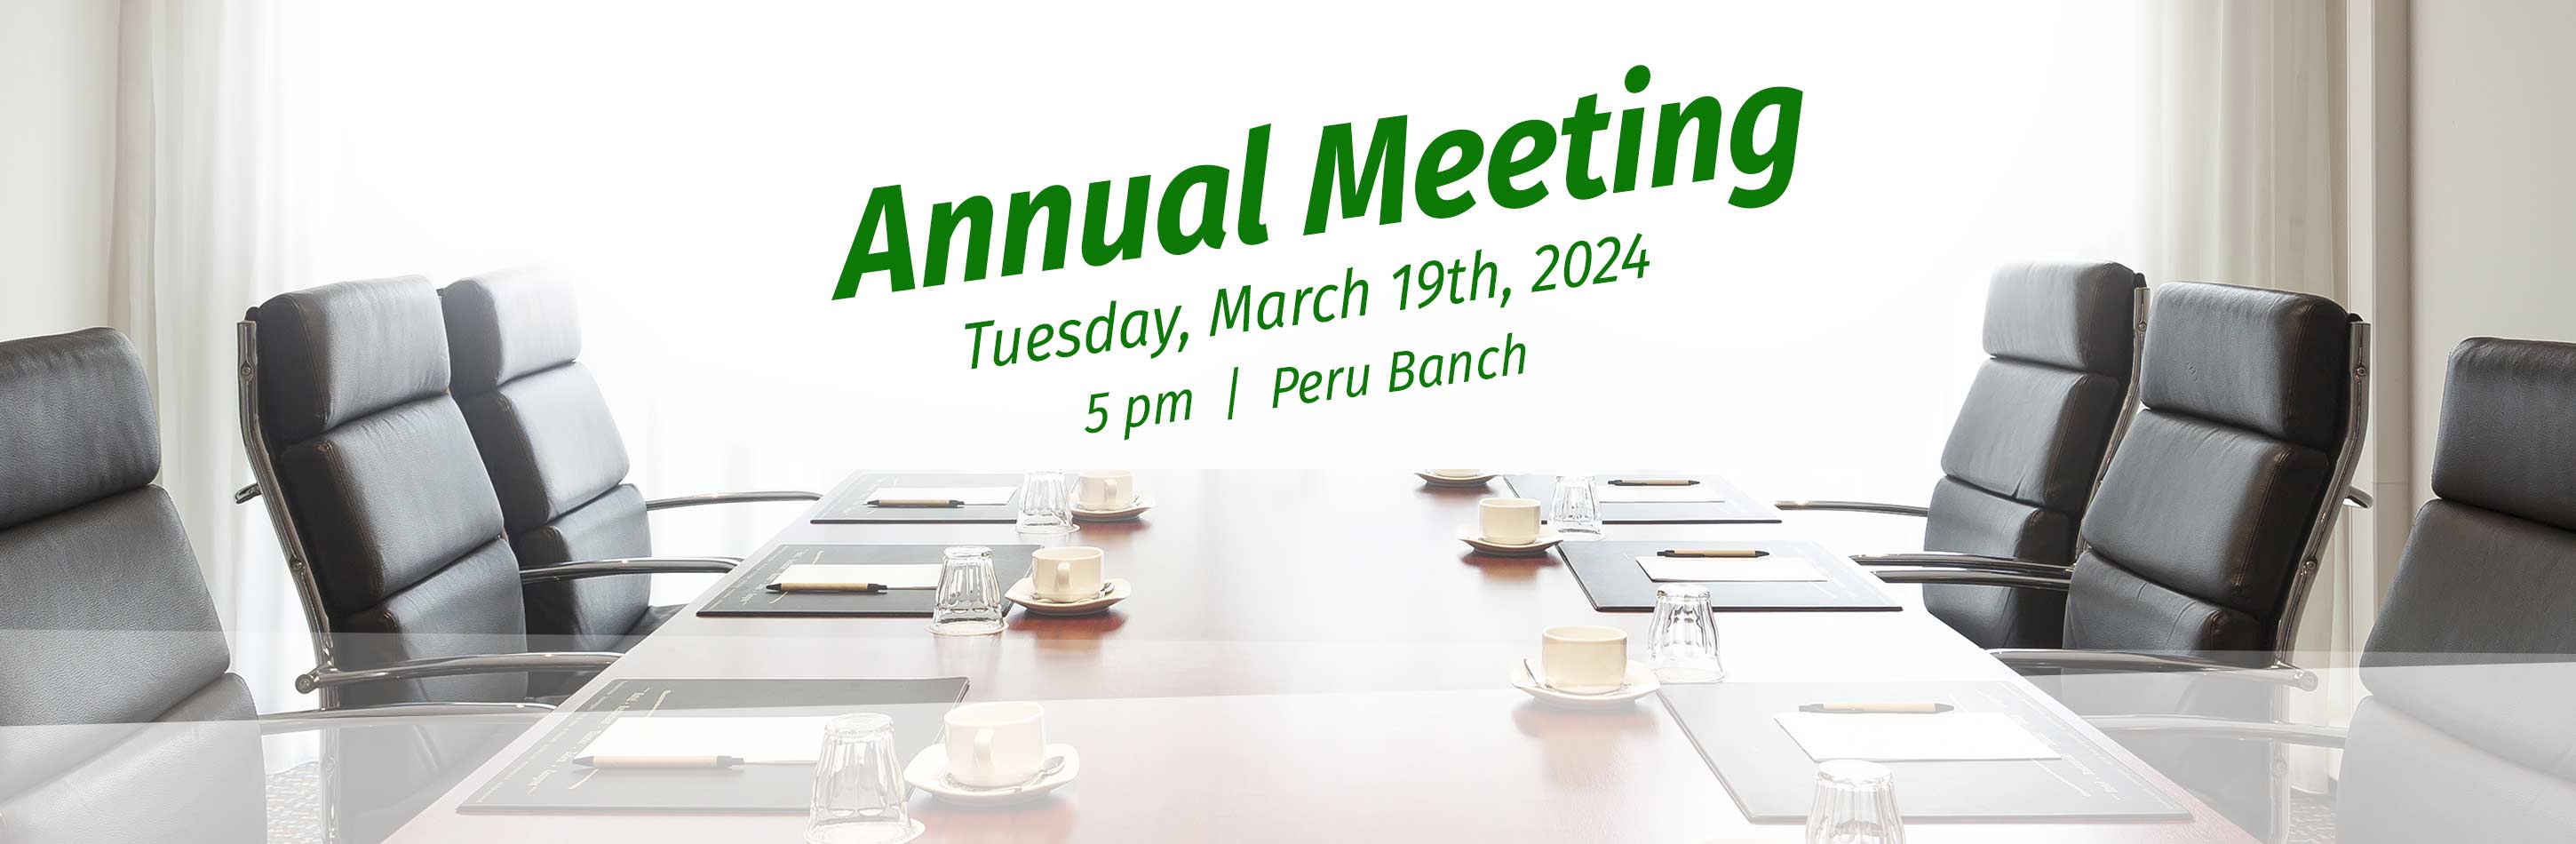 Annual Meeting Tuesday, March 19th, 2024 at 5 pm  |  Peru Branch  |  815.224.2667 ext. 226